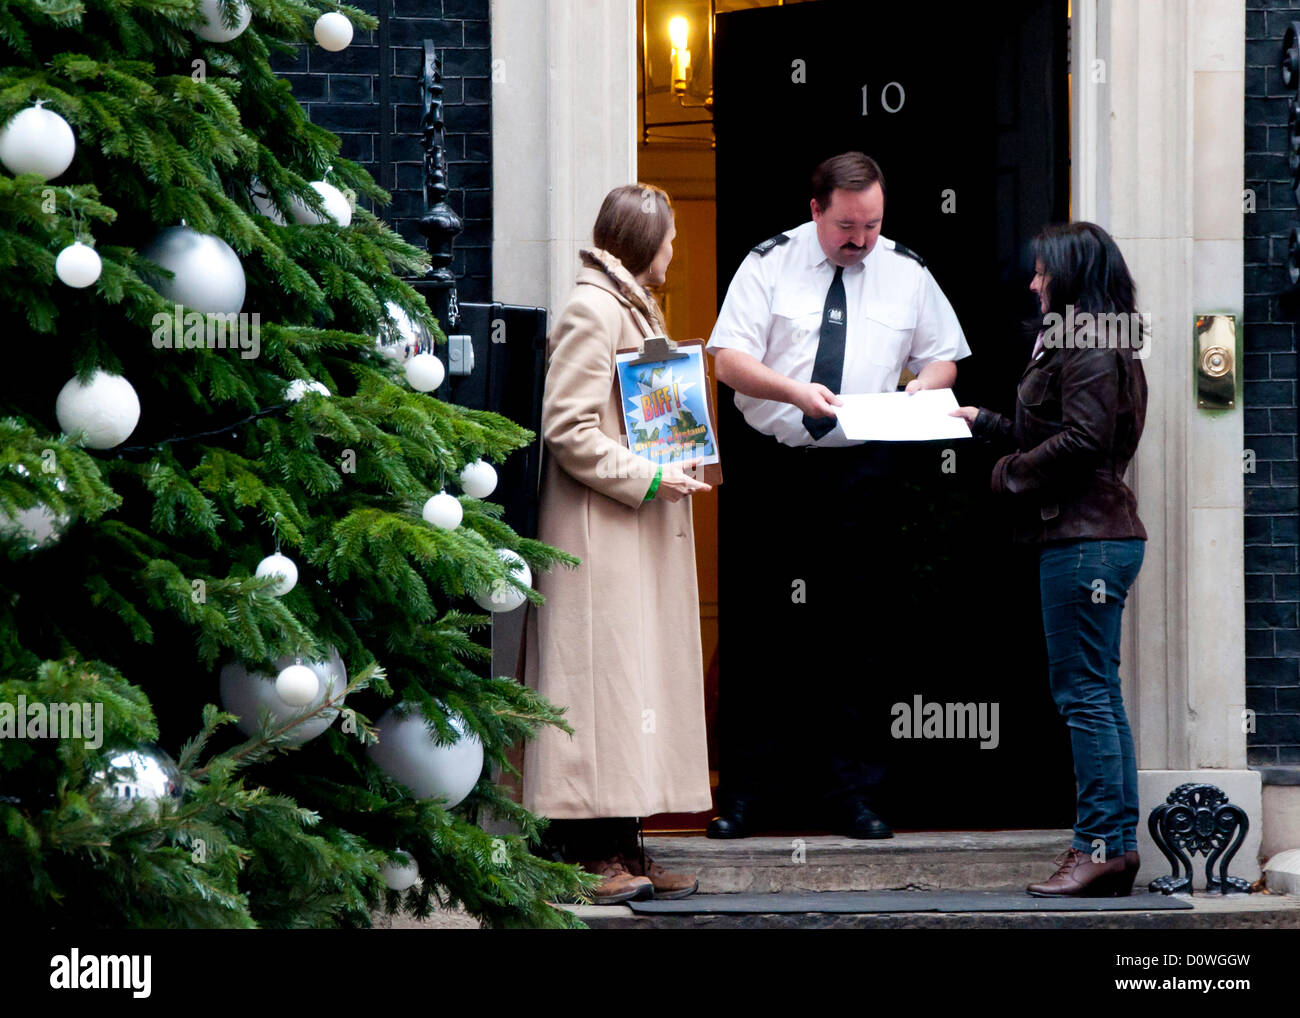 London, UK, 1 December 2012; Eve McNamara (right) of Ribble Estuary Against Fracking hands in a letter to 10 Downing Street addressed to UK Prime Minister David Cameron. Fellow protester Vanessa Vine stands at the other side of the door (left). A copy of the letter can be downloaded from http://www.frackfreefylde.com/open-letter-to-david-cameron/ Stock Photo